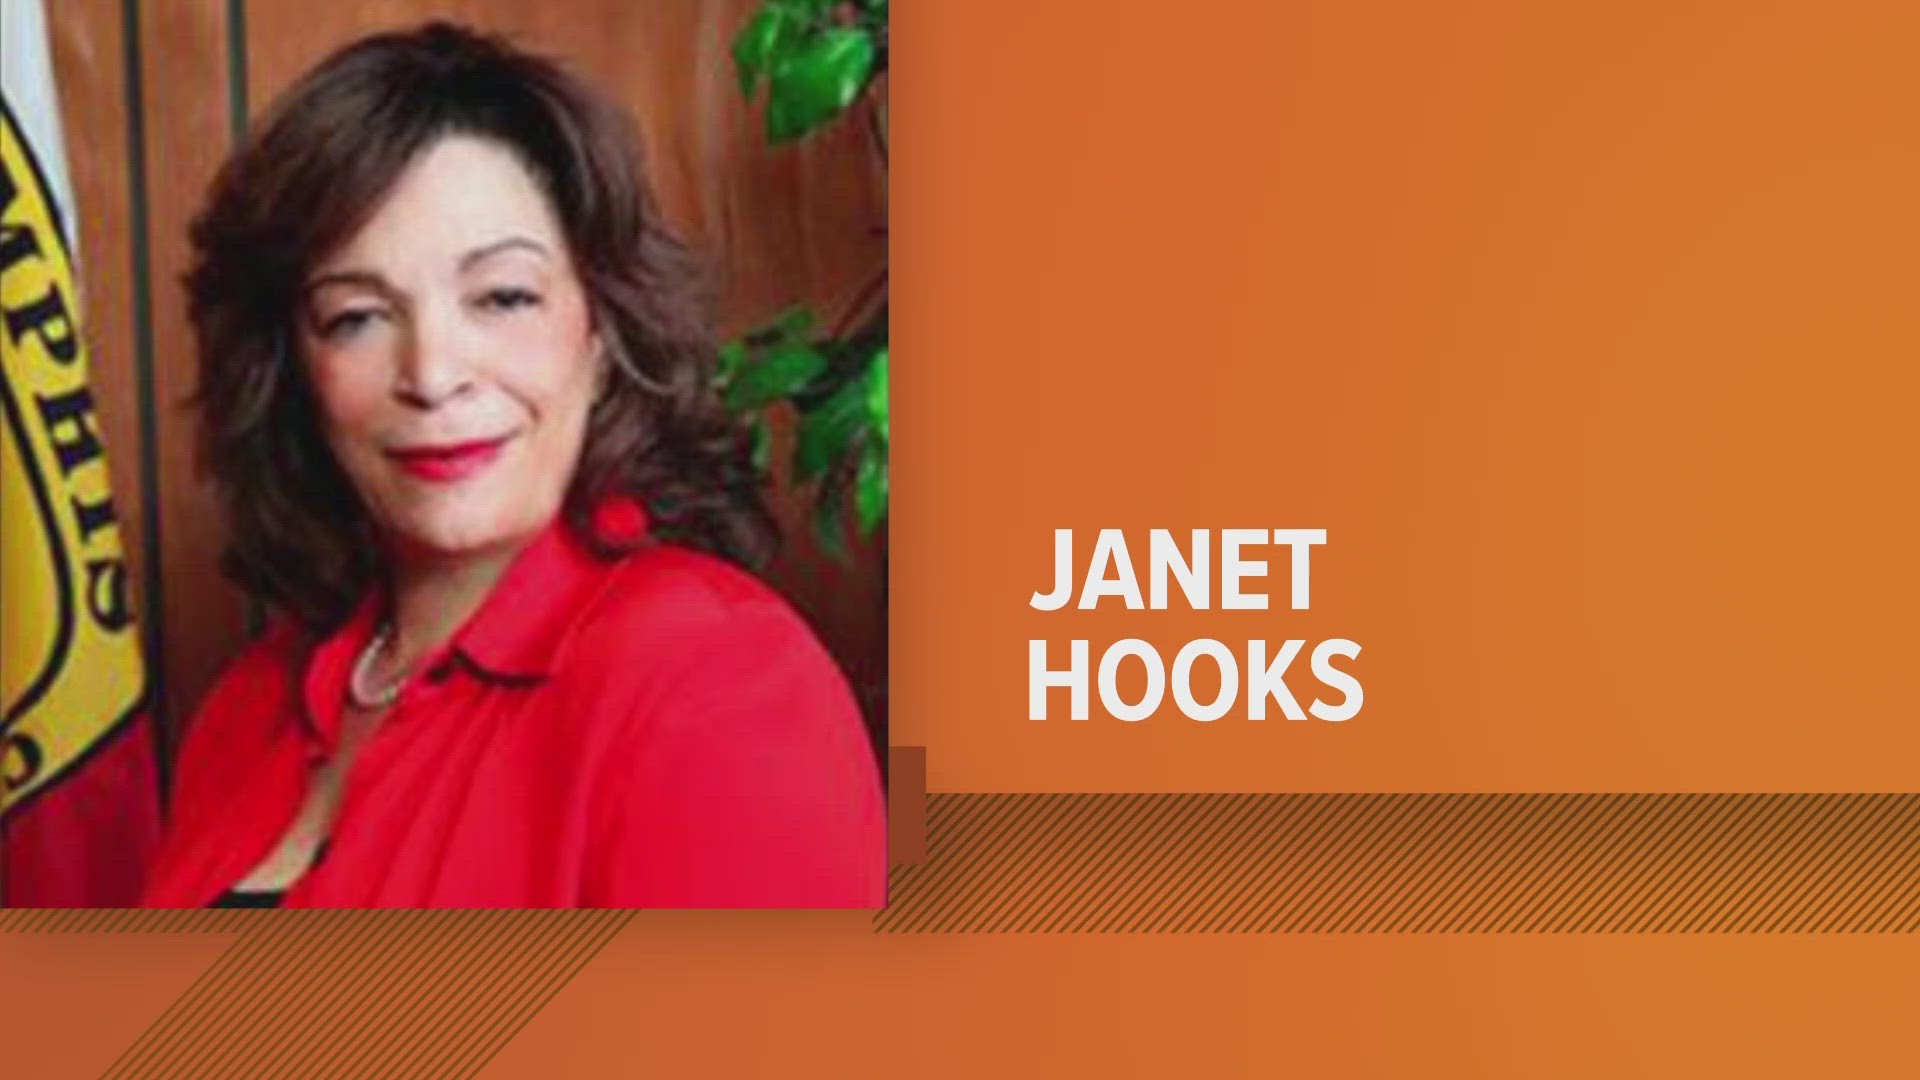 "We are welcoming Mrs. Hooks to assist however she can to address the myriad of issues we know exist and have reported," said Halbert in a statement.